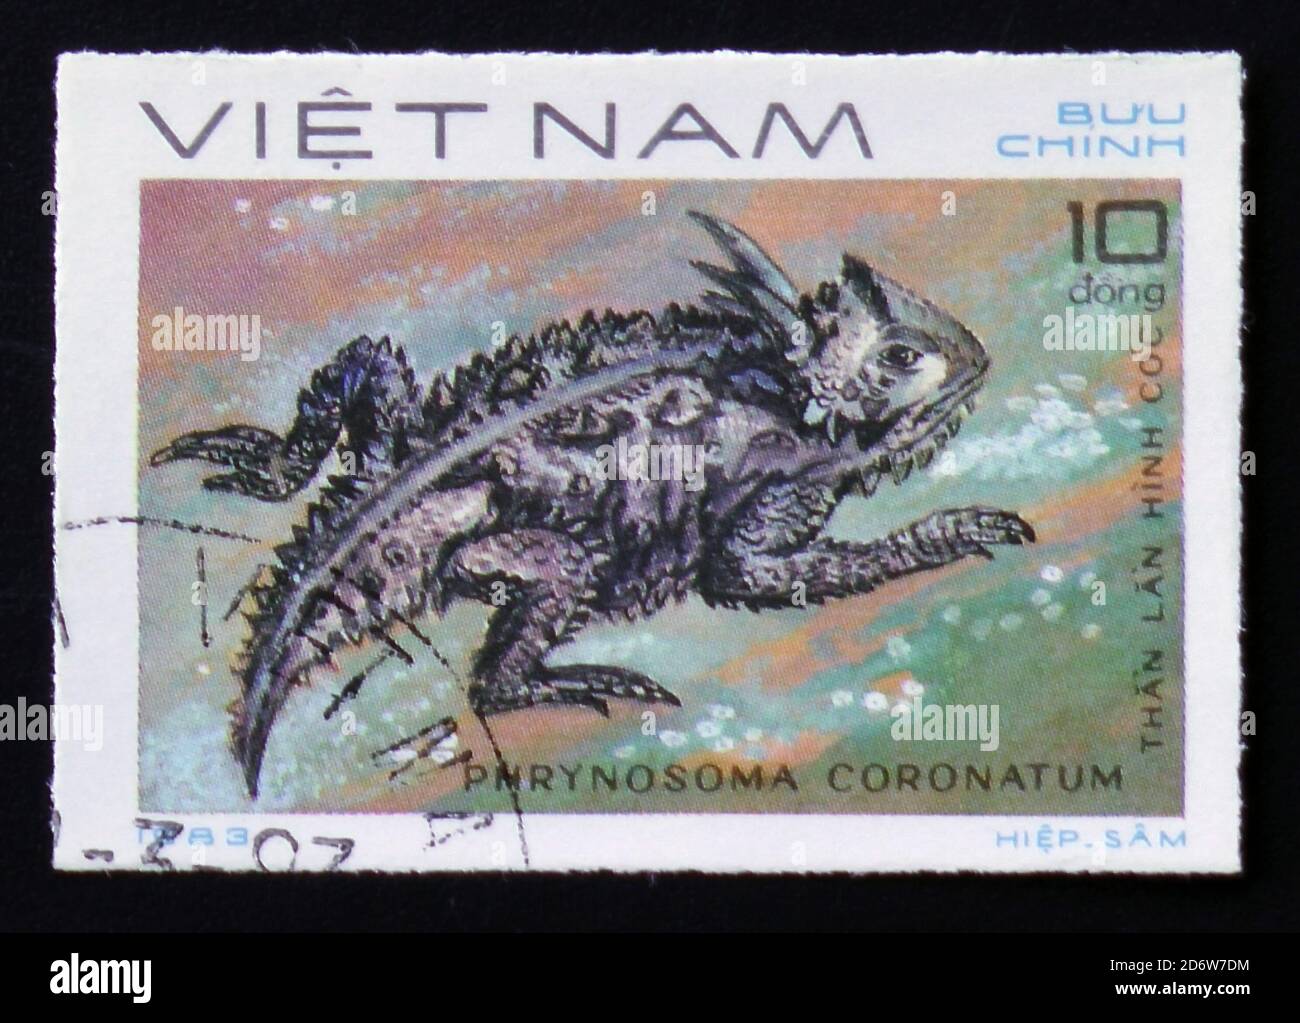 MOSCOW, RUSSIA - FEBRUARY 12, 2017: A Stamp printed in VIETNAM shows the image of a Coast Horned Lizard with the description 'Phrynosoma coronatum' fr Stock Photo